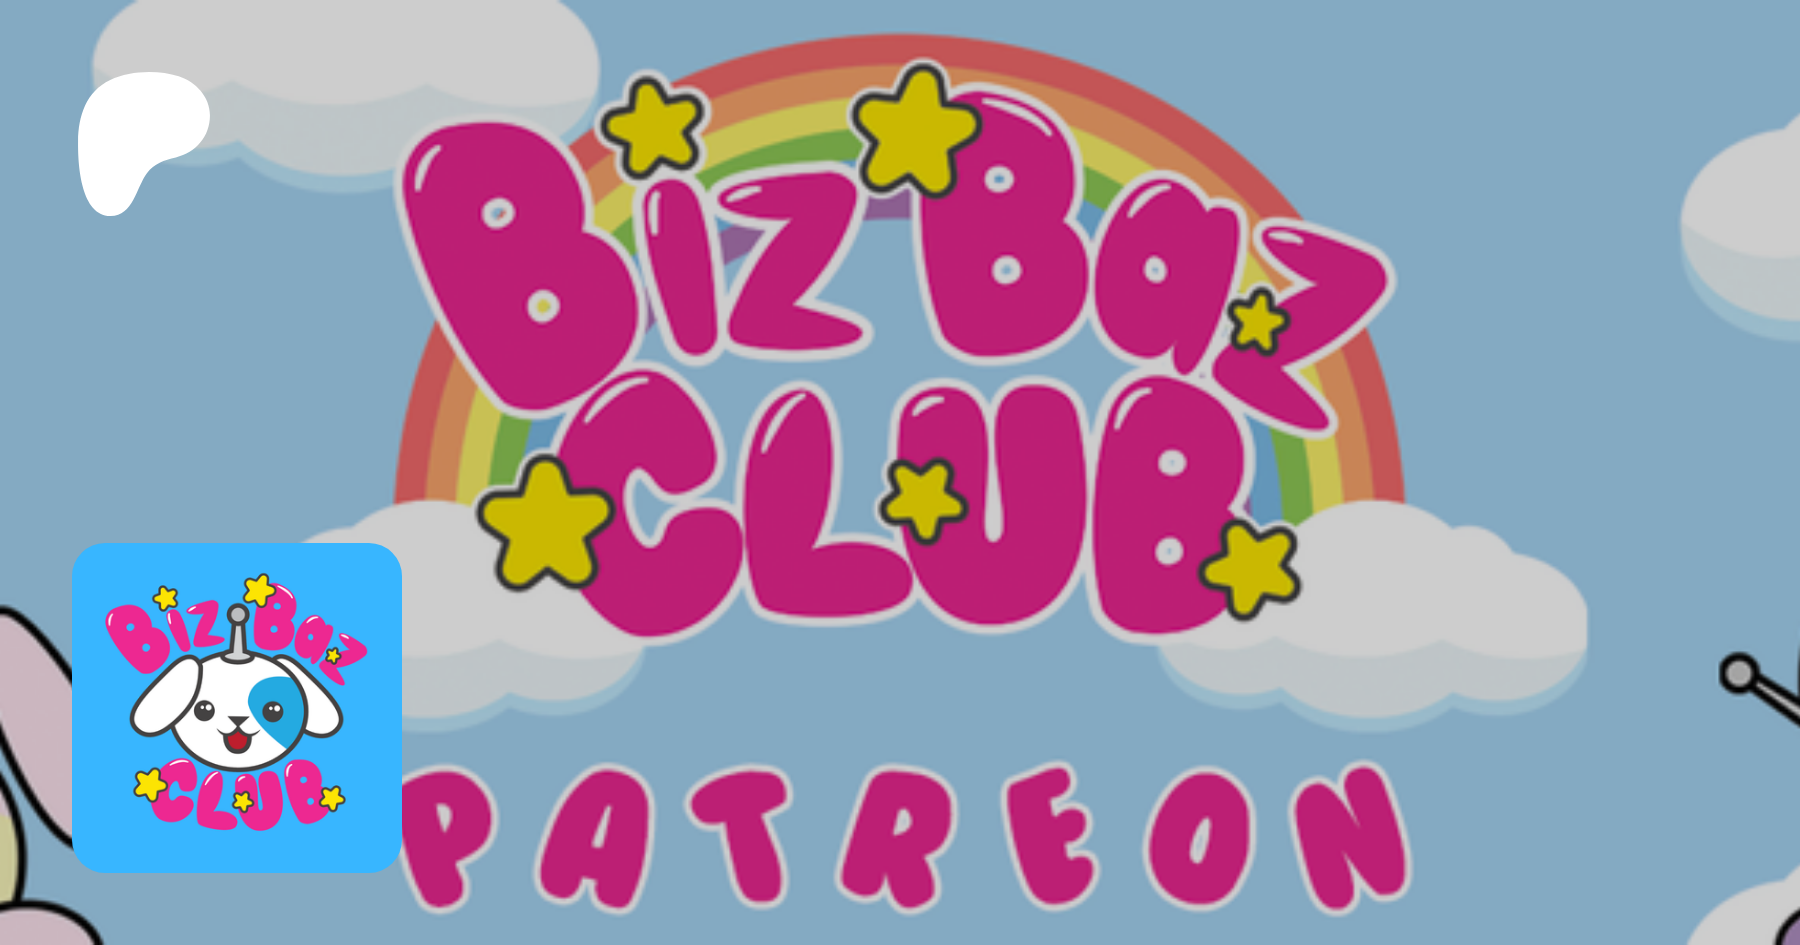 Join our FREE Discord Channel! – BizBaz Club